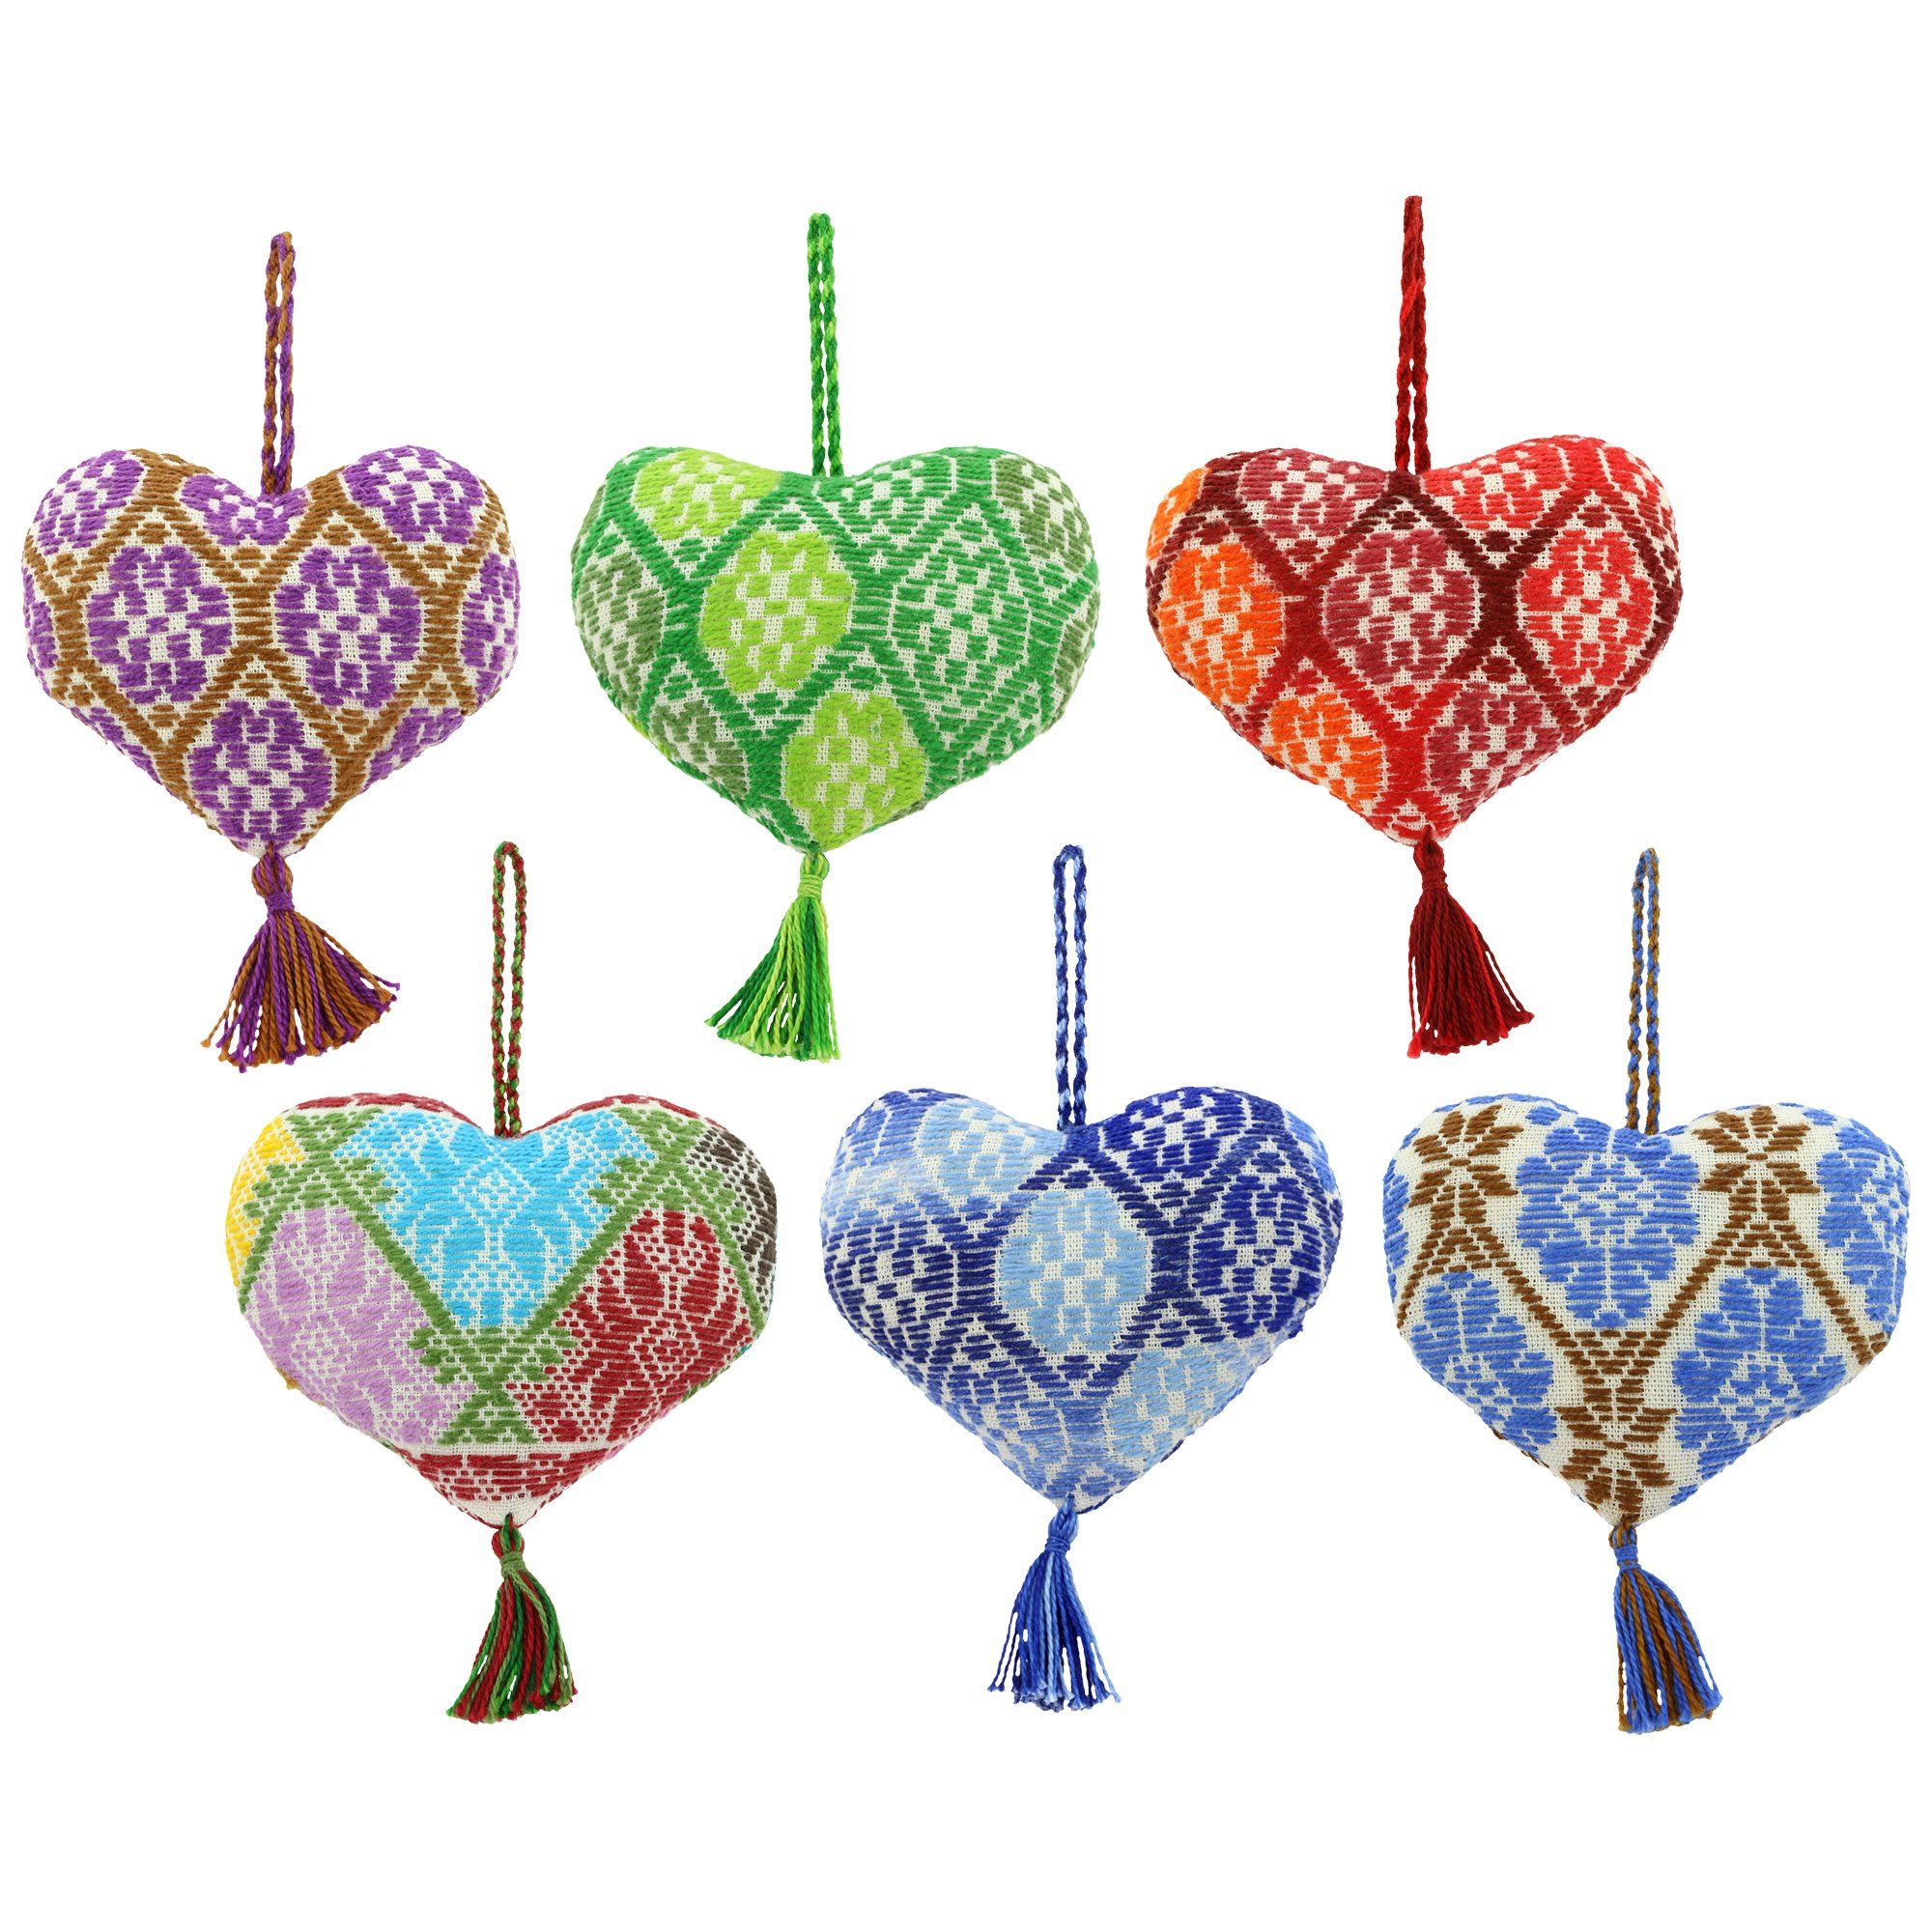 Hand-Embroidered Heart Ornament - Blue/Brown - Single